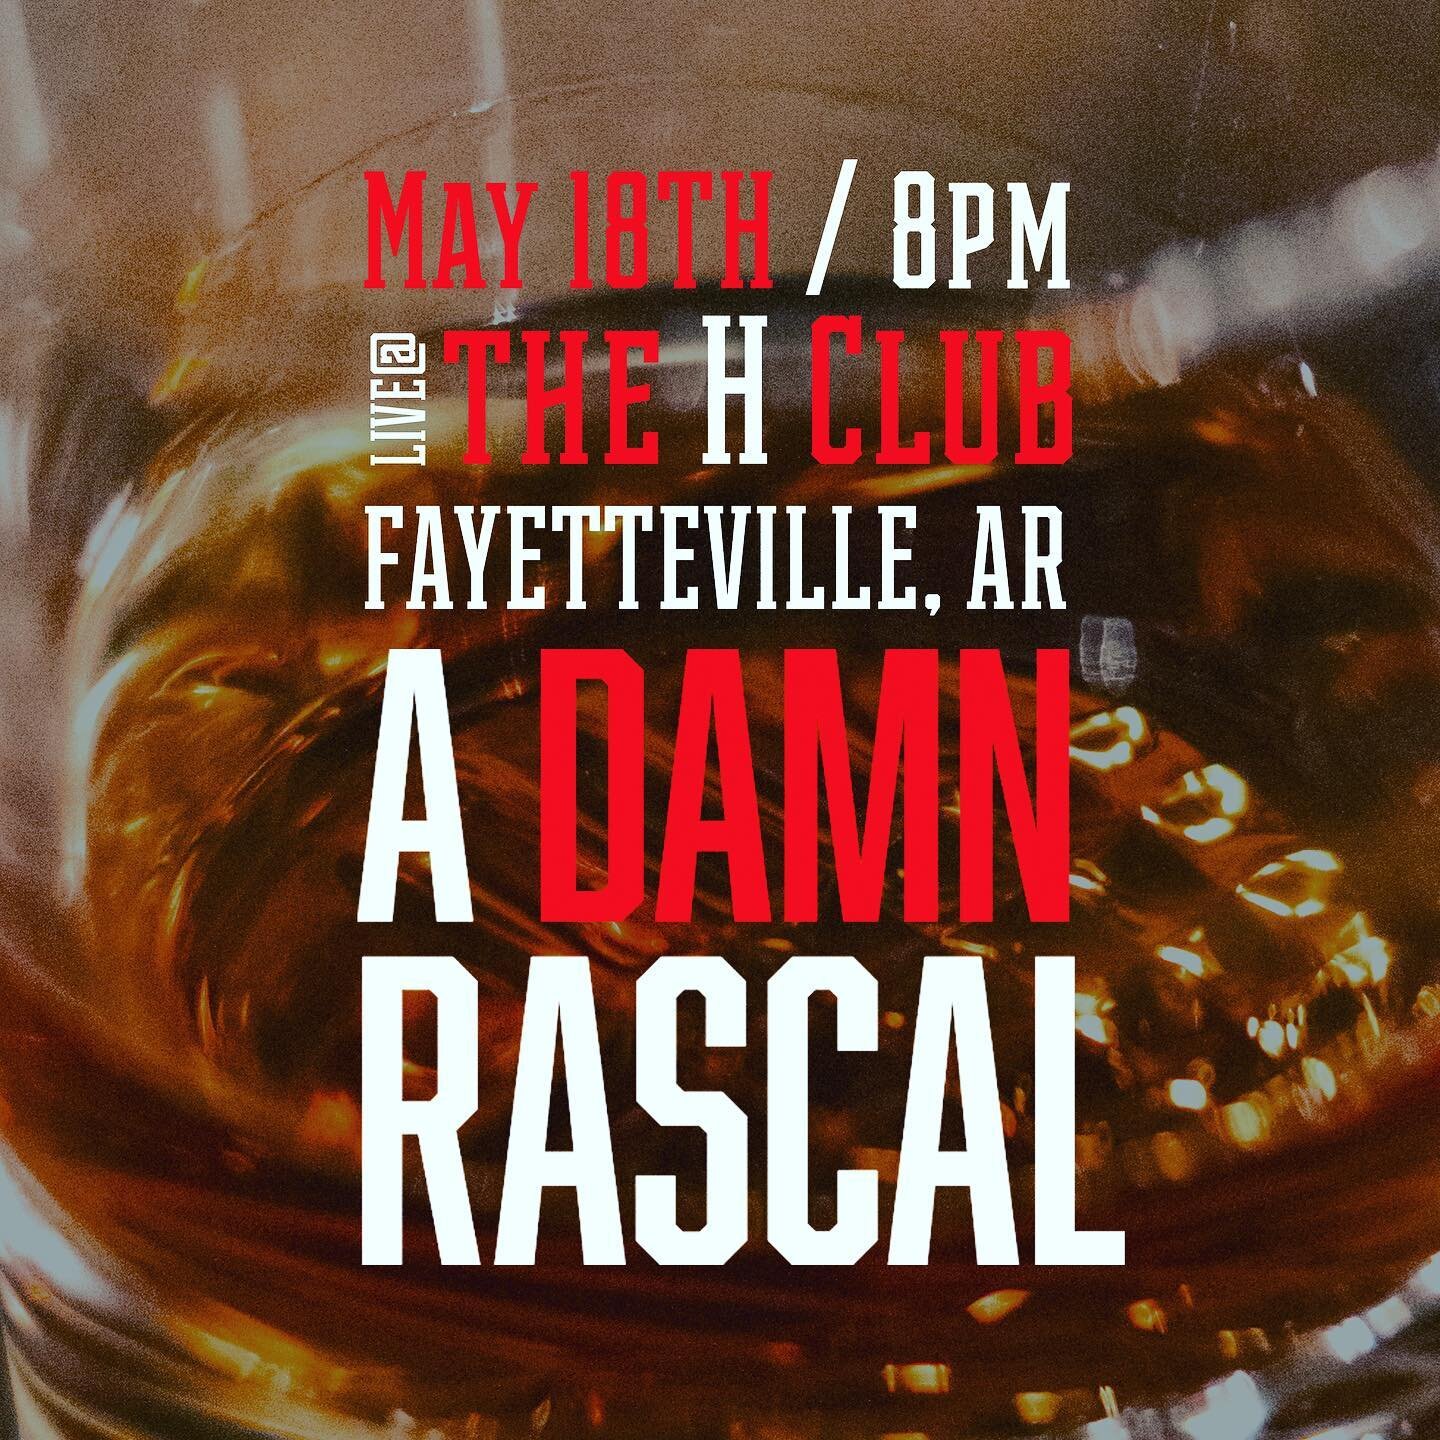 New Rascal Date / May 18 @hubbardclothingco in Fayetteville.
Mark your damn calendars!